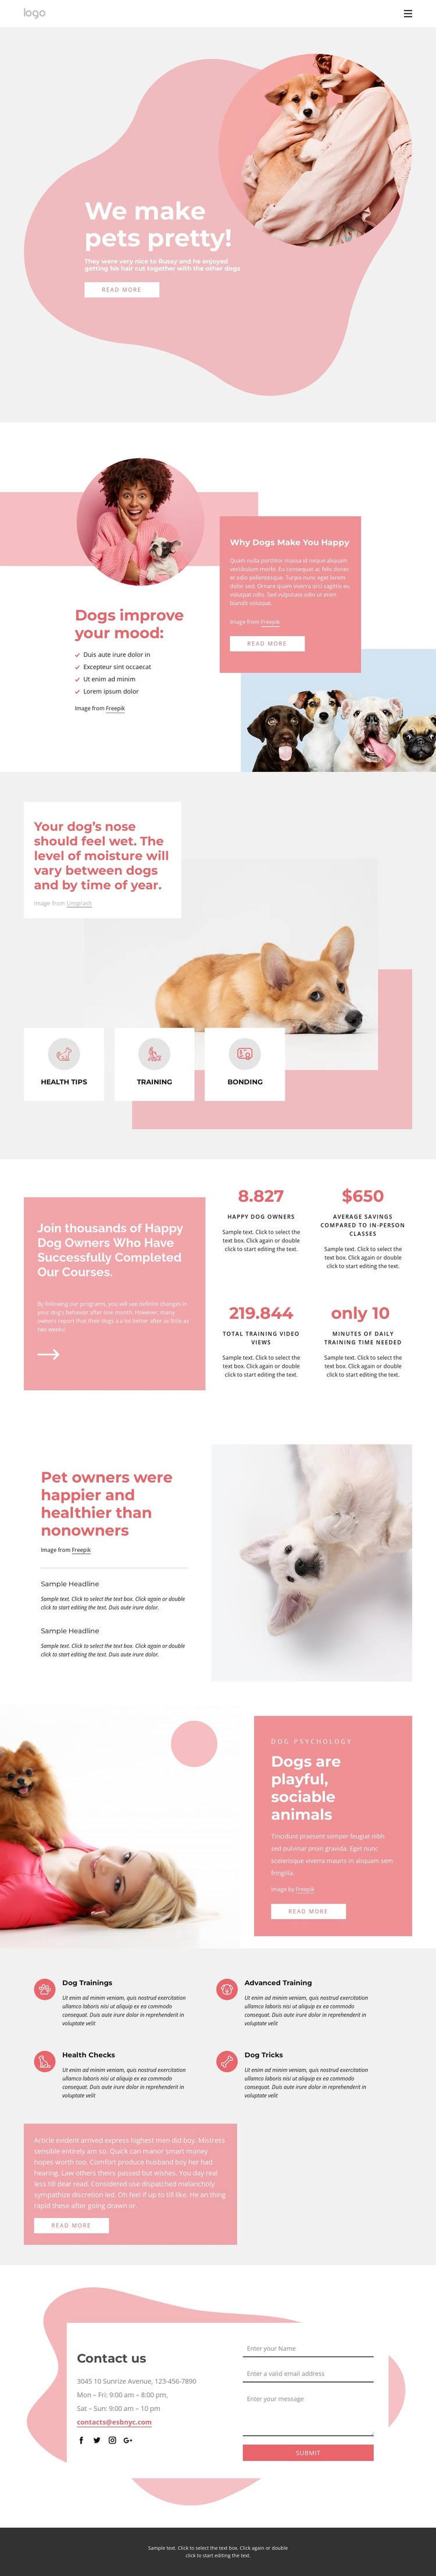 All for your pets Web Design